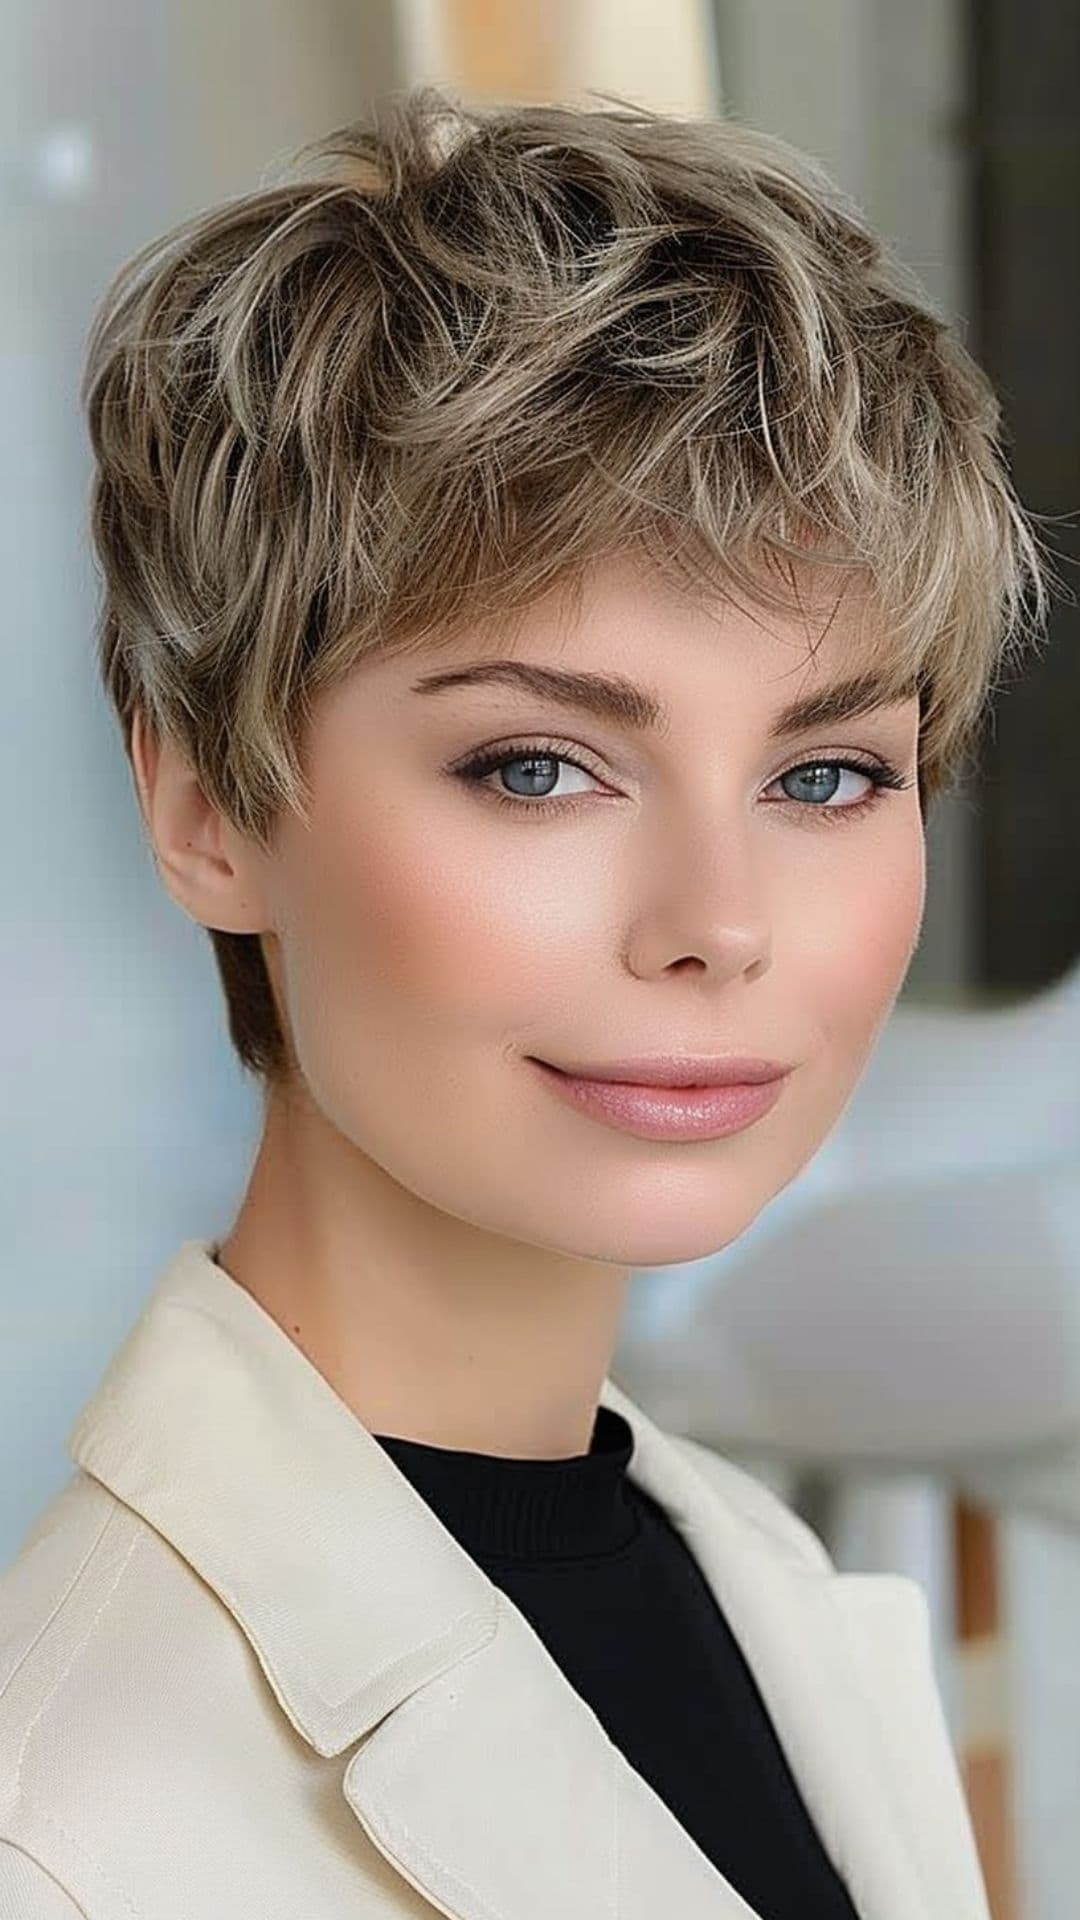 A woman modelling a pixie cut with longer fringe.